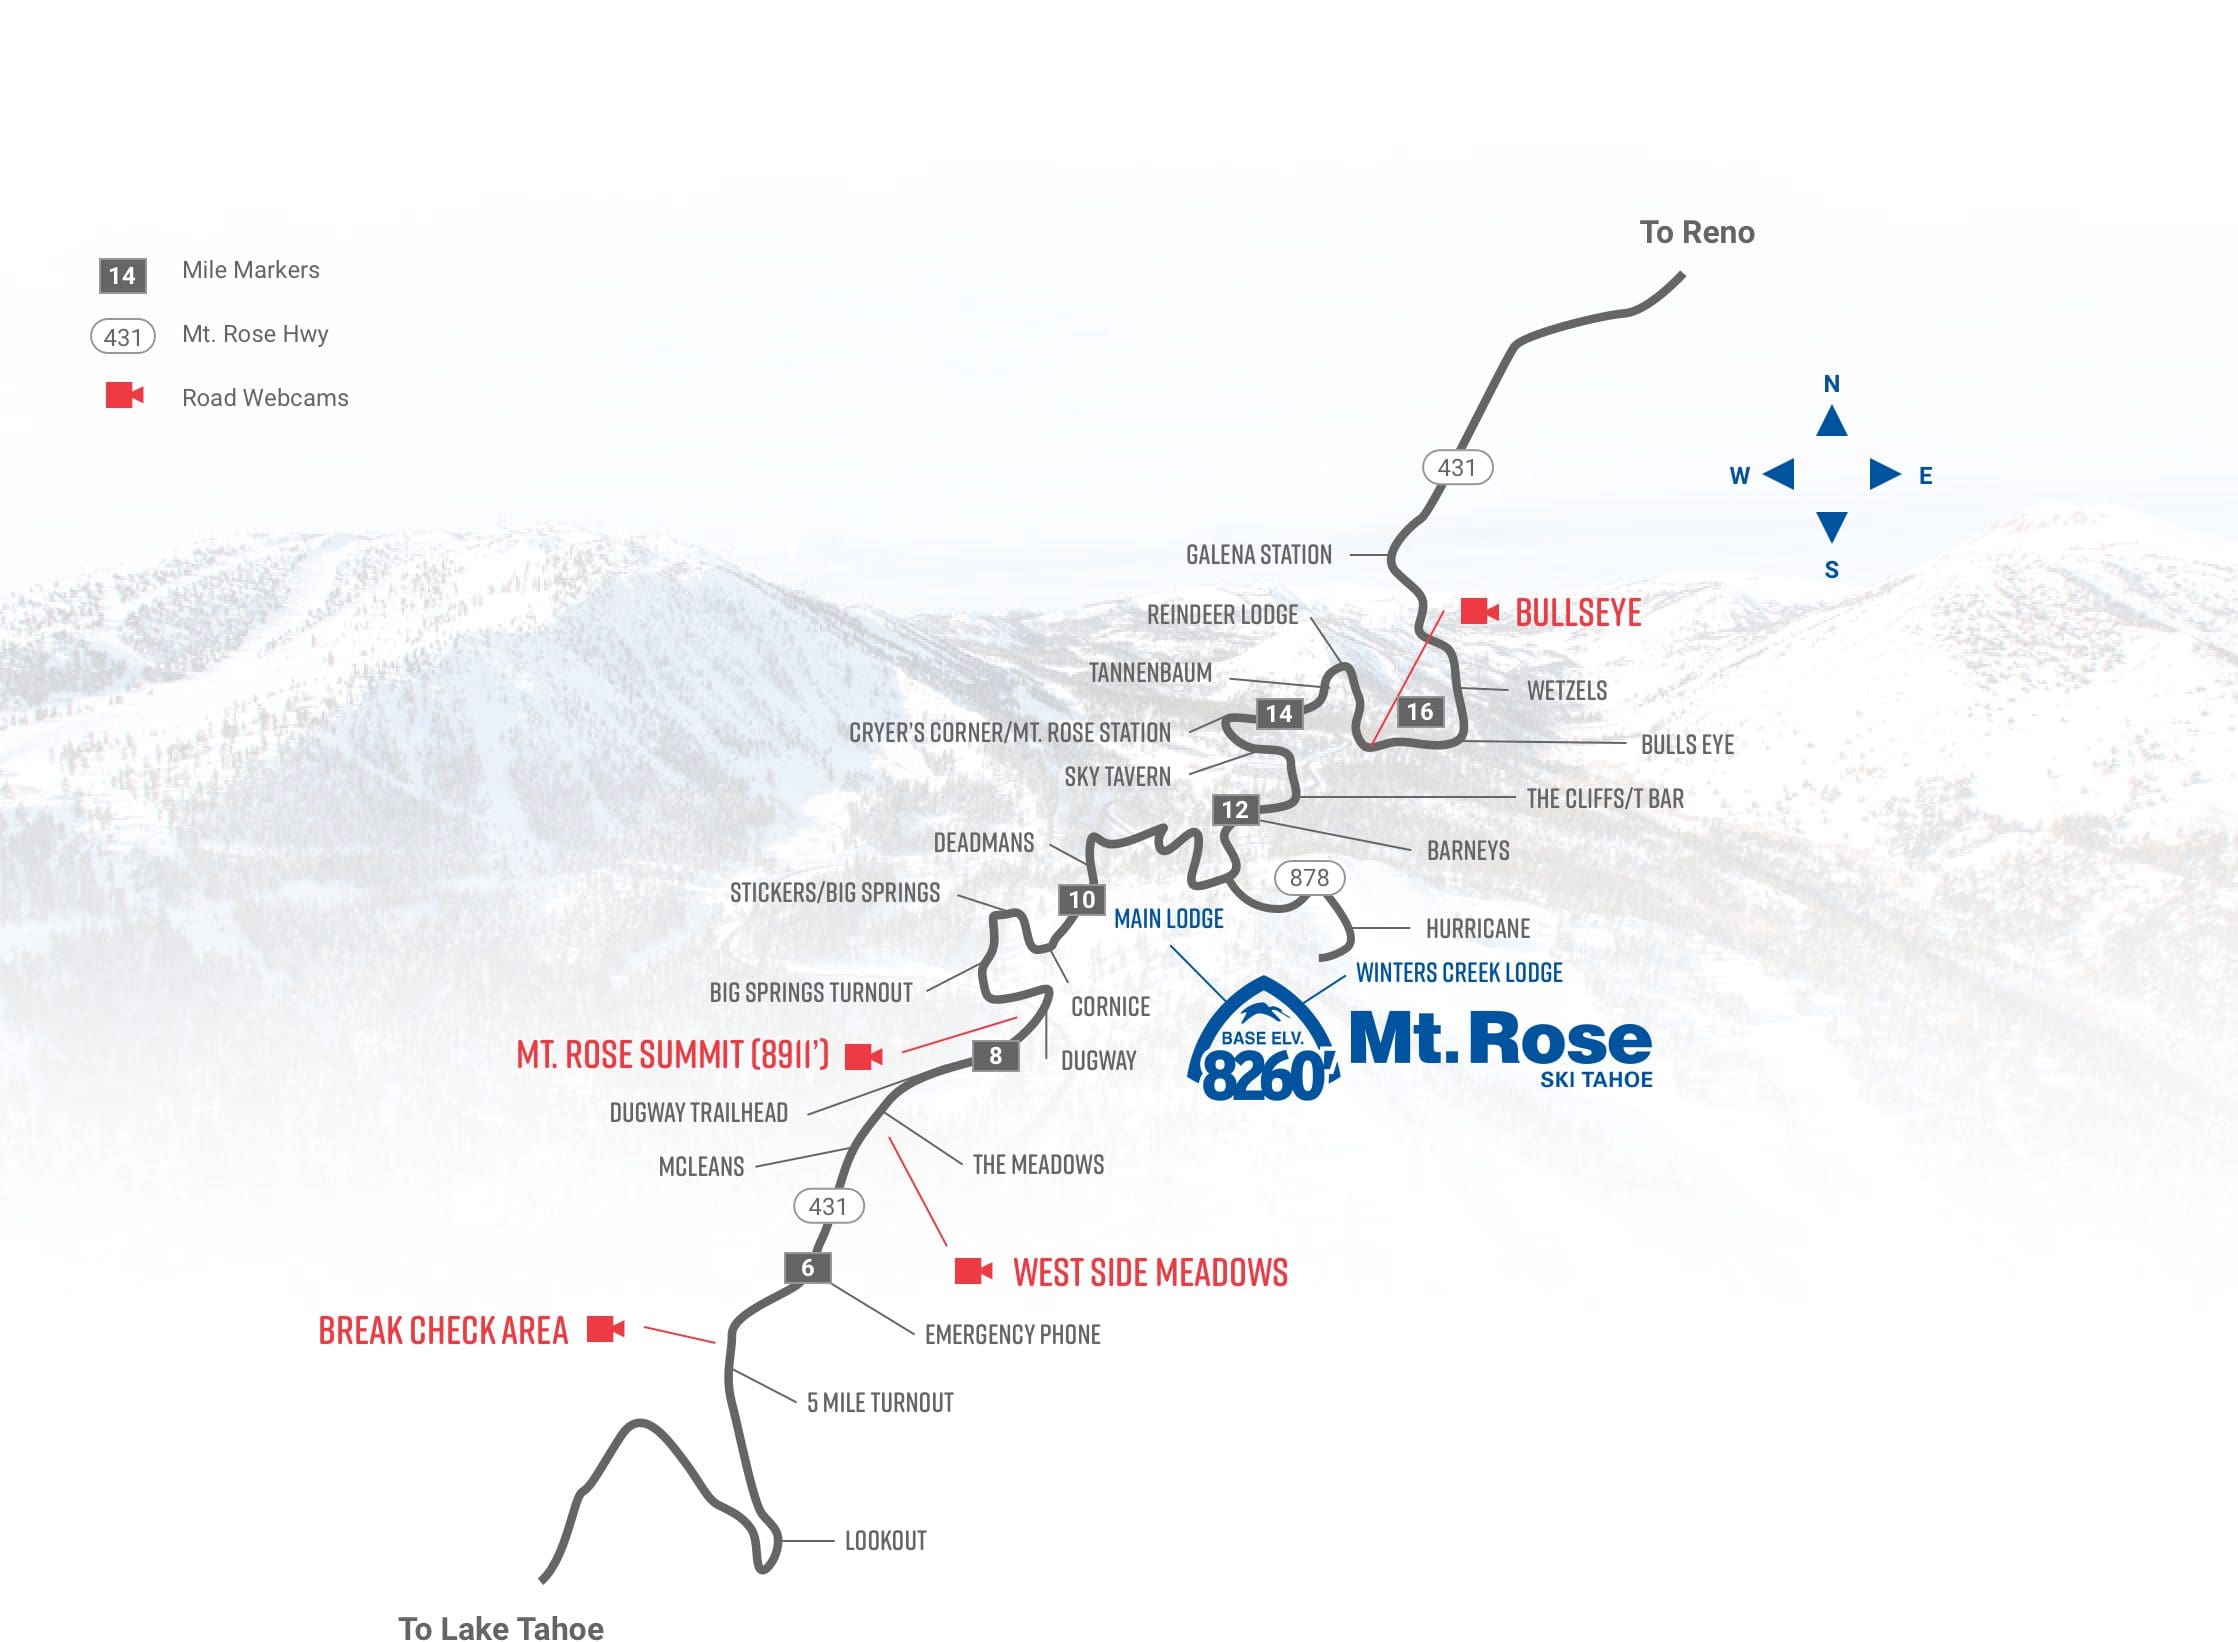 Mt. Rose A detailed map of Mt. Rose Ski Tahoe resort in Nevada, showing various trails, lodges, and ski lifts. Notable locations include the Mt. Rose Summit (8917 feet), Winters Creek Lodge, Main Lodge, and Break Check Area. Major routes for getting to Mt. Rose from Reno and Lake Tahoe are marked.